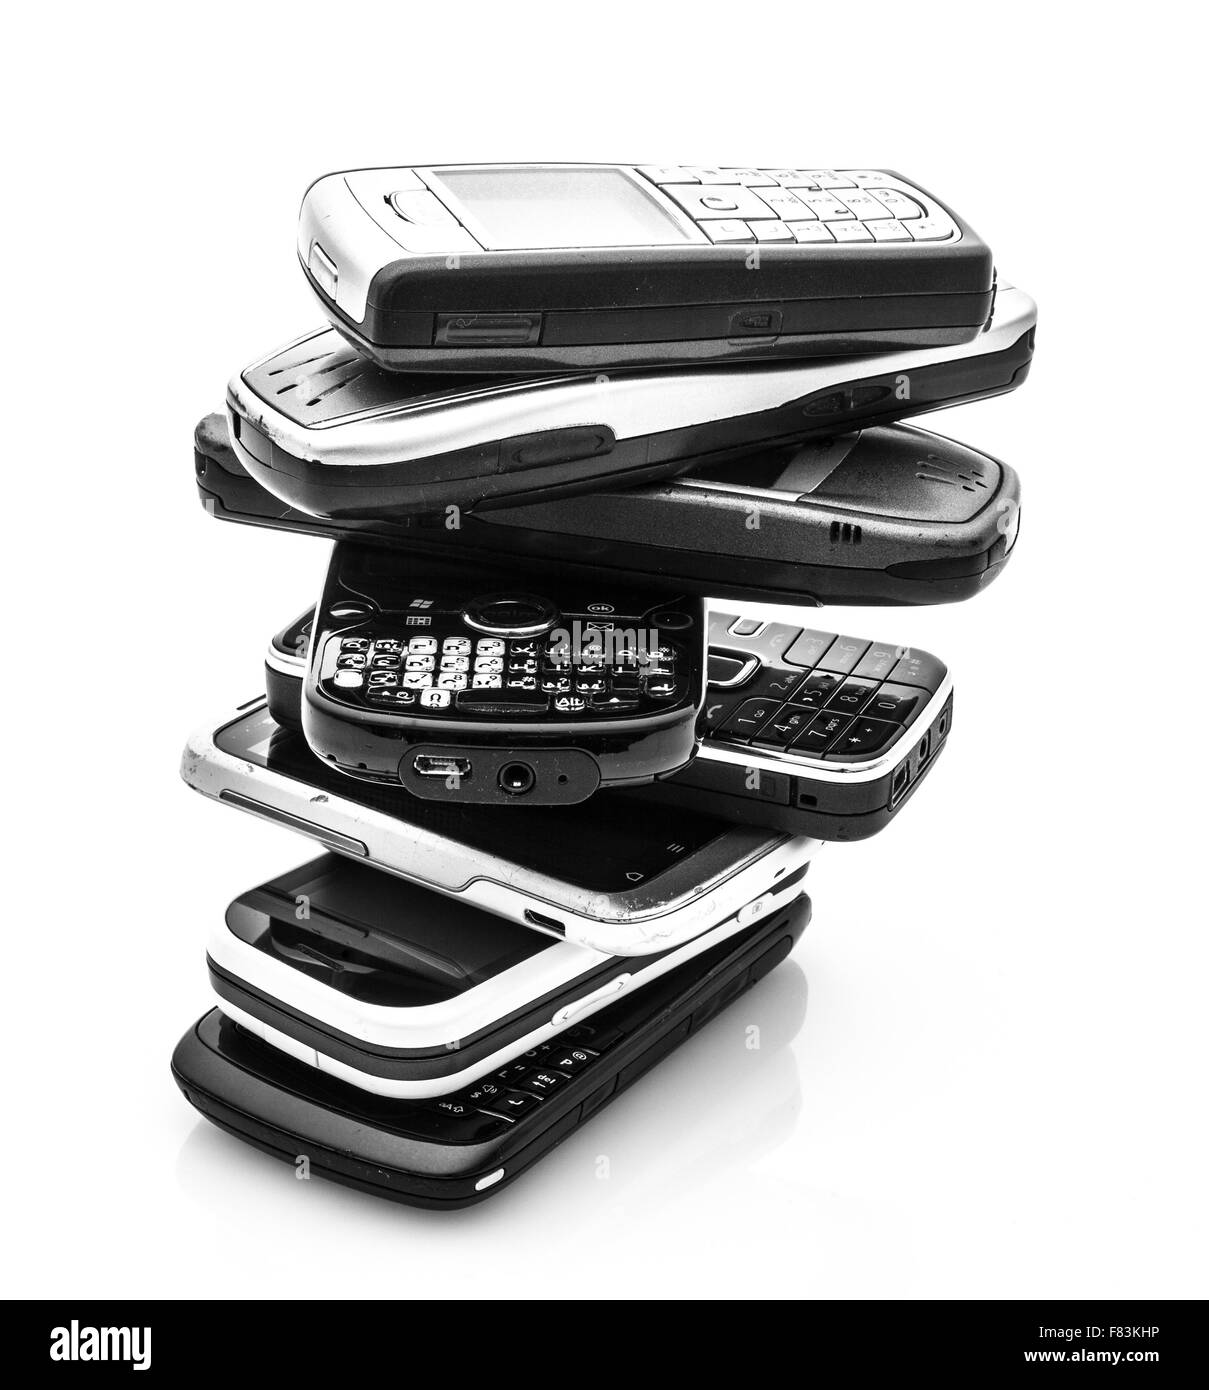 A Collection Of Old Mobile Cell Phones on A White Background Stock Photo